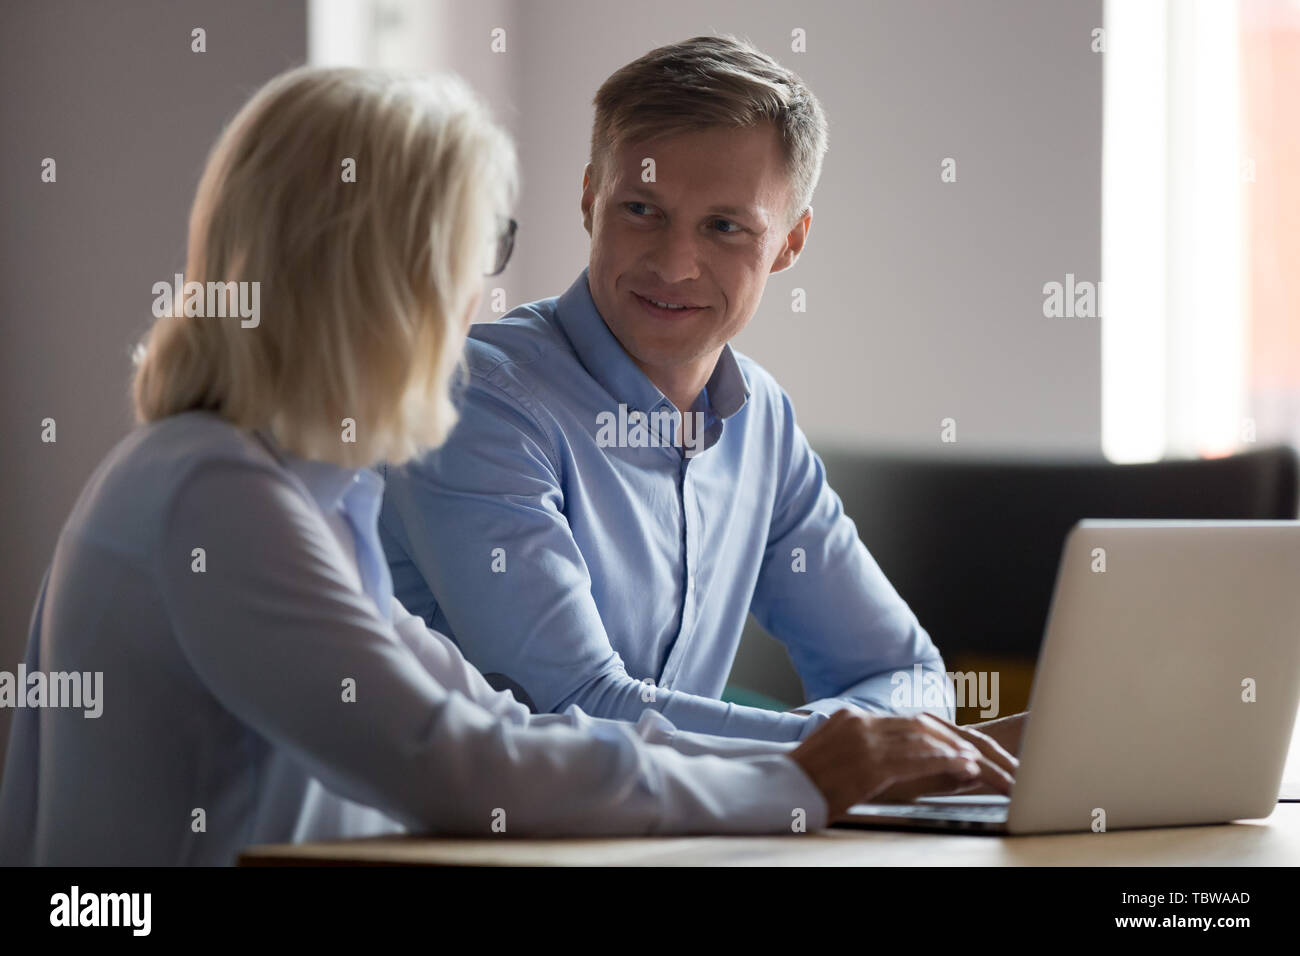 Trainee talking with mature businesswoman, mentor, working together Stock Photo